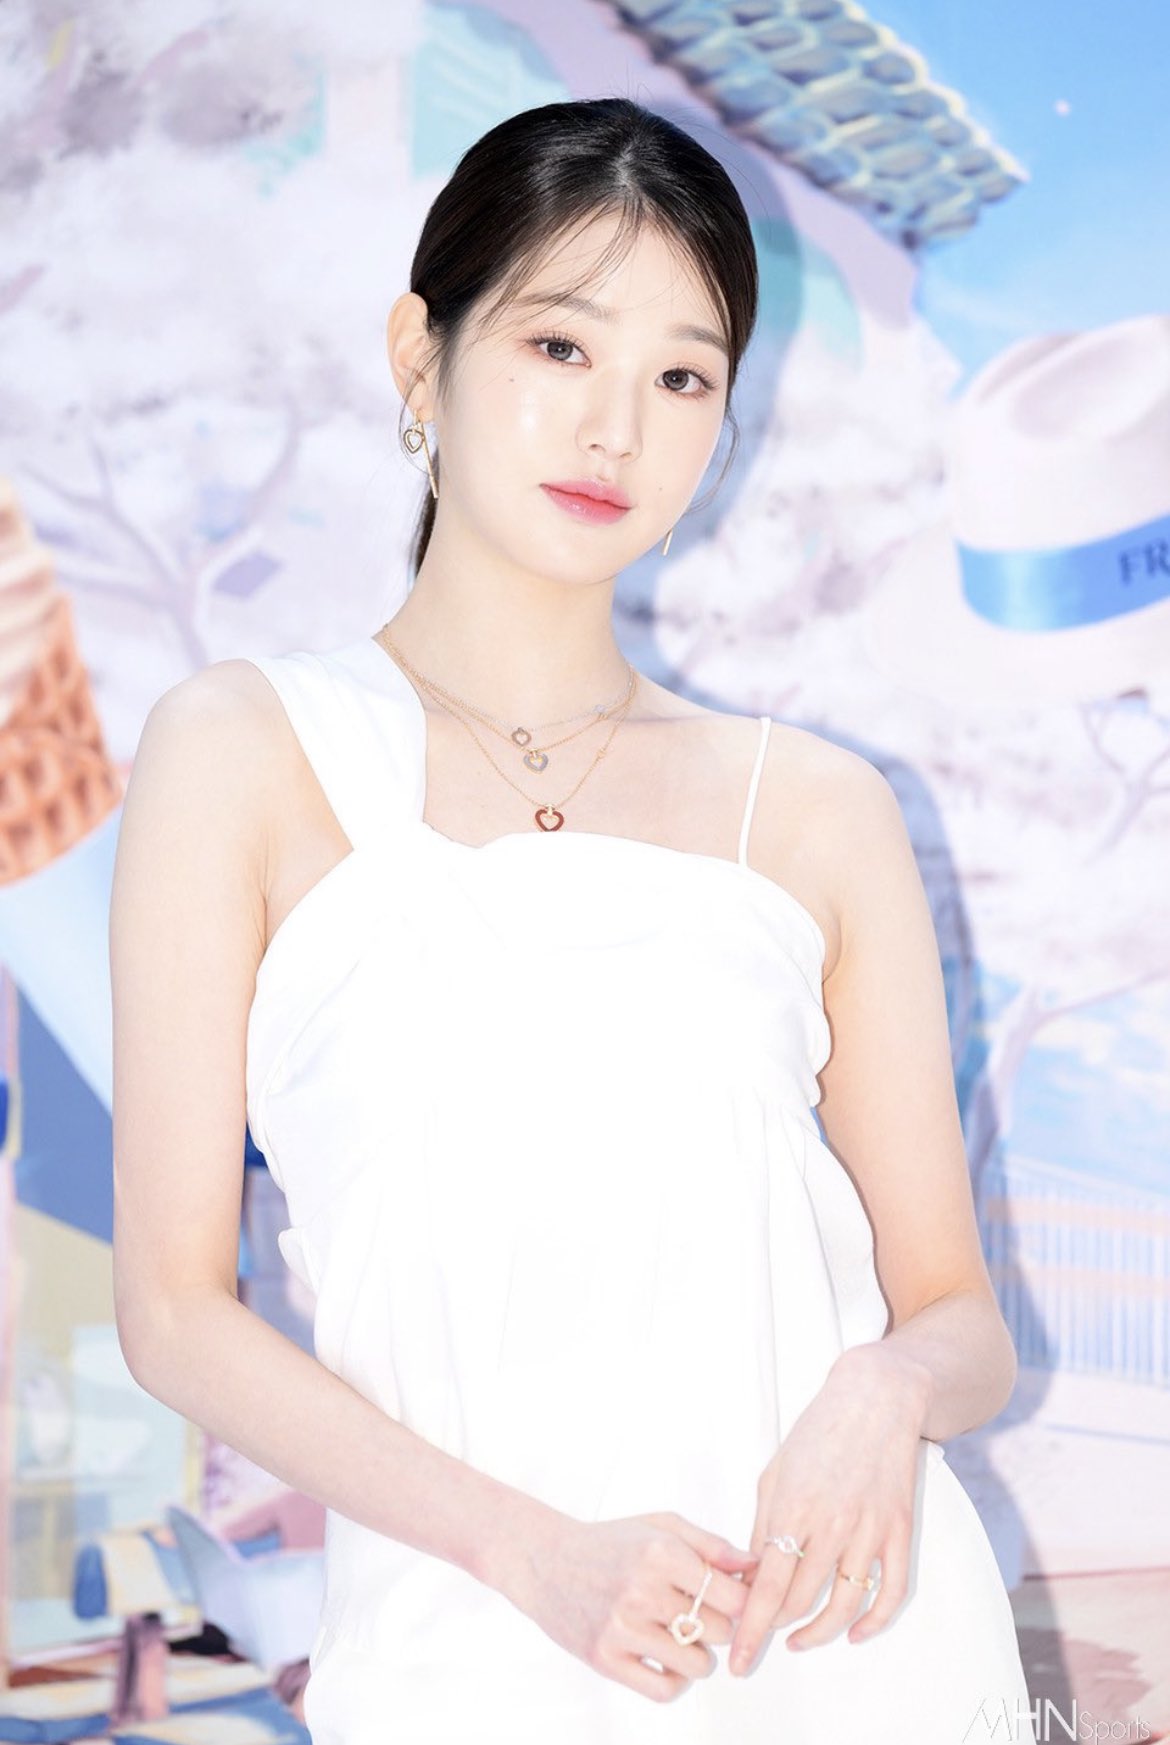 GLOBALMYEON on X: #IVE's Wonyoung at the Fred Jewelry Pop-Up Photo Event.   / X